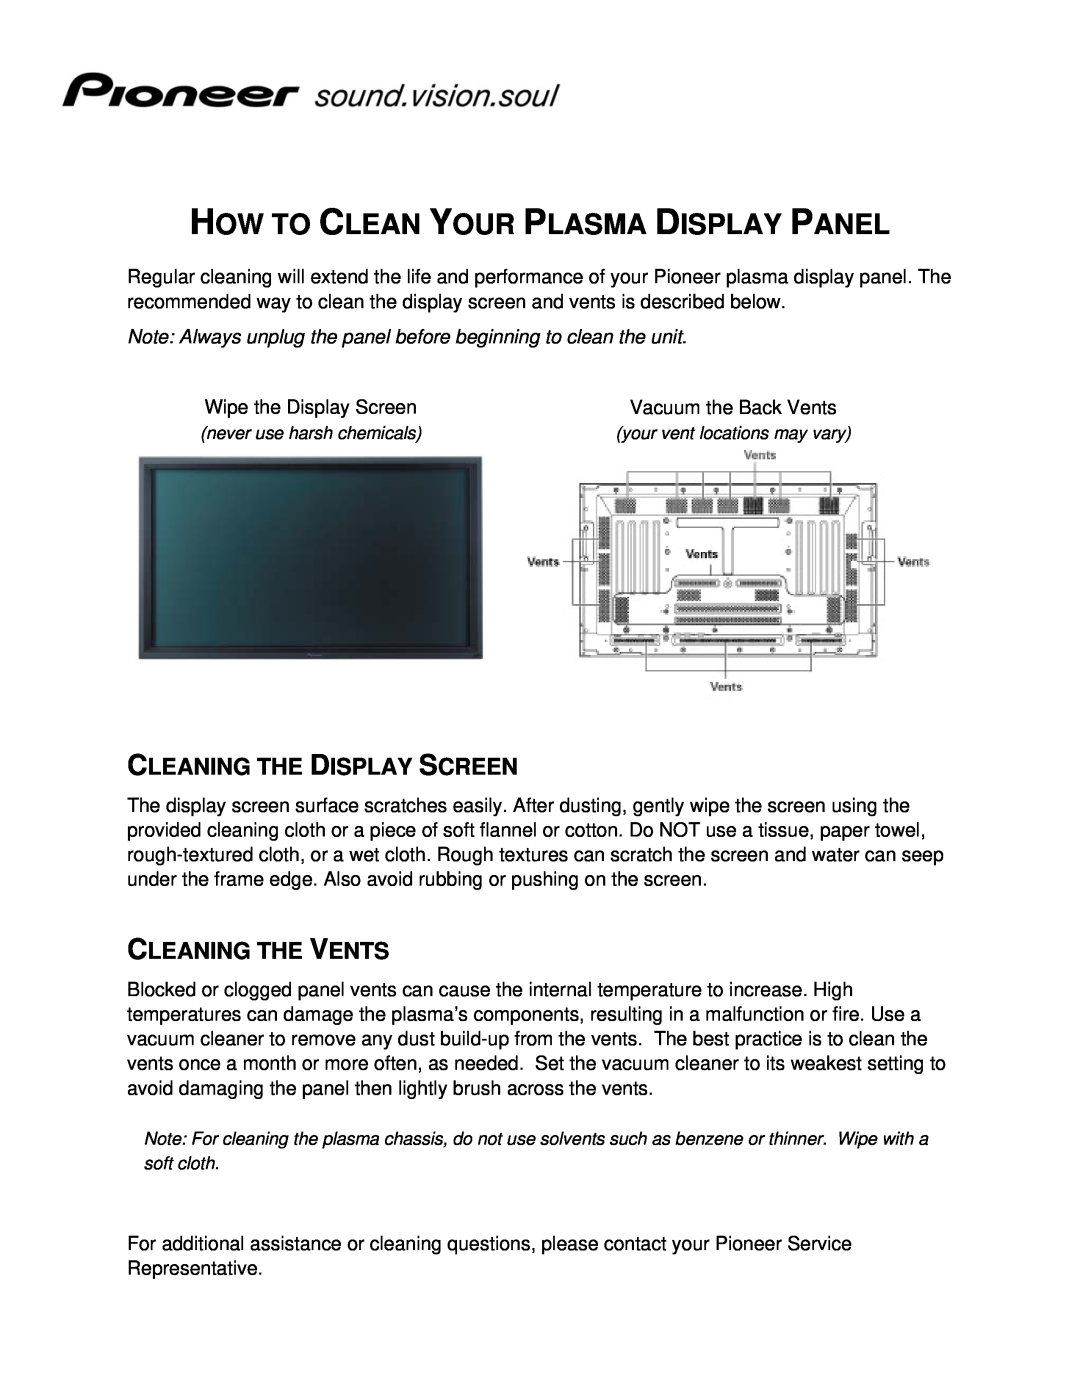 Pioneer manual How To Clean Your Plasma Display Panel, Cleaning The Display Screen, Cleaning The Vents 